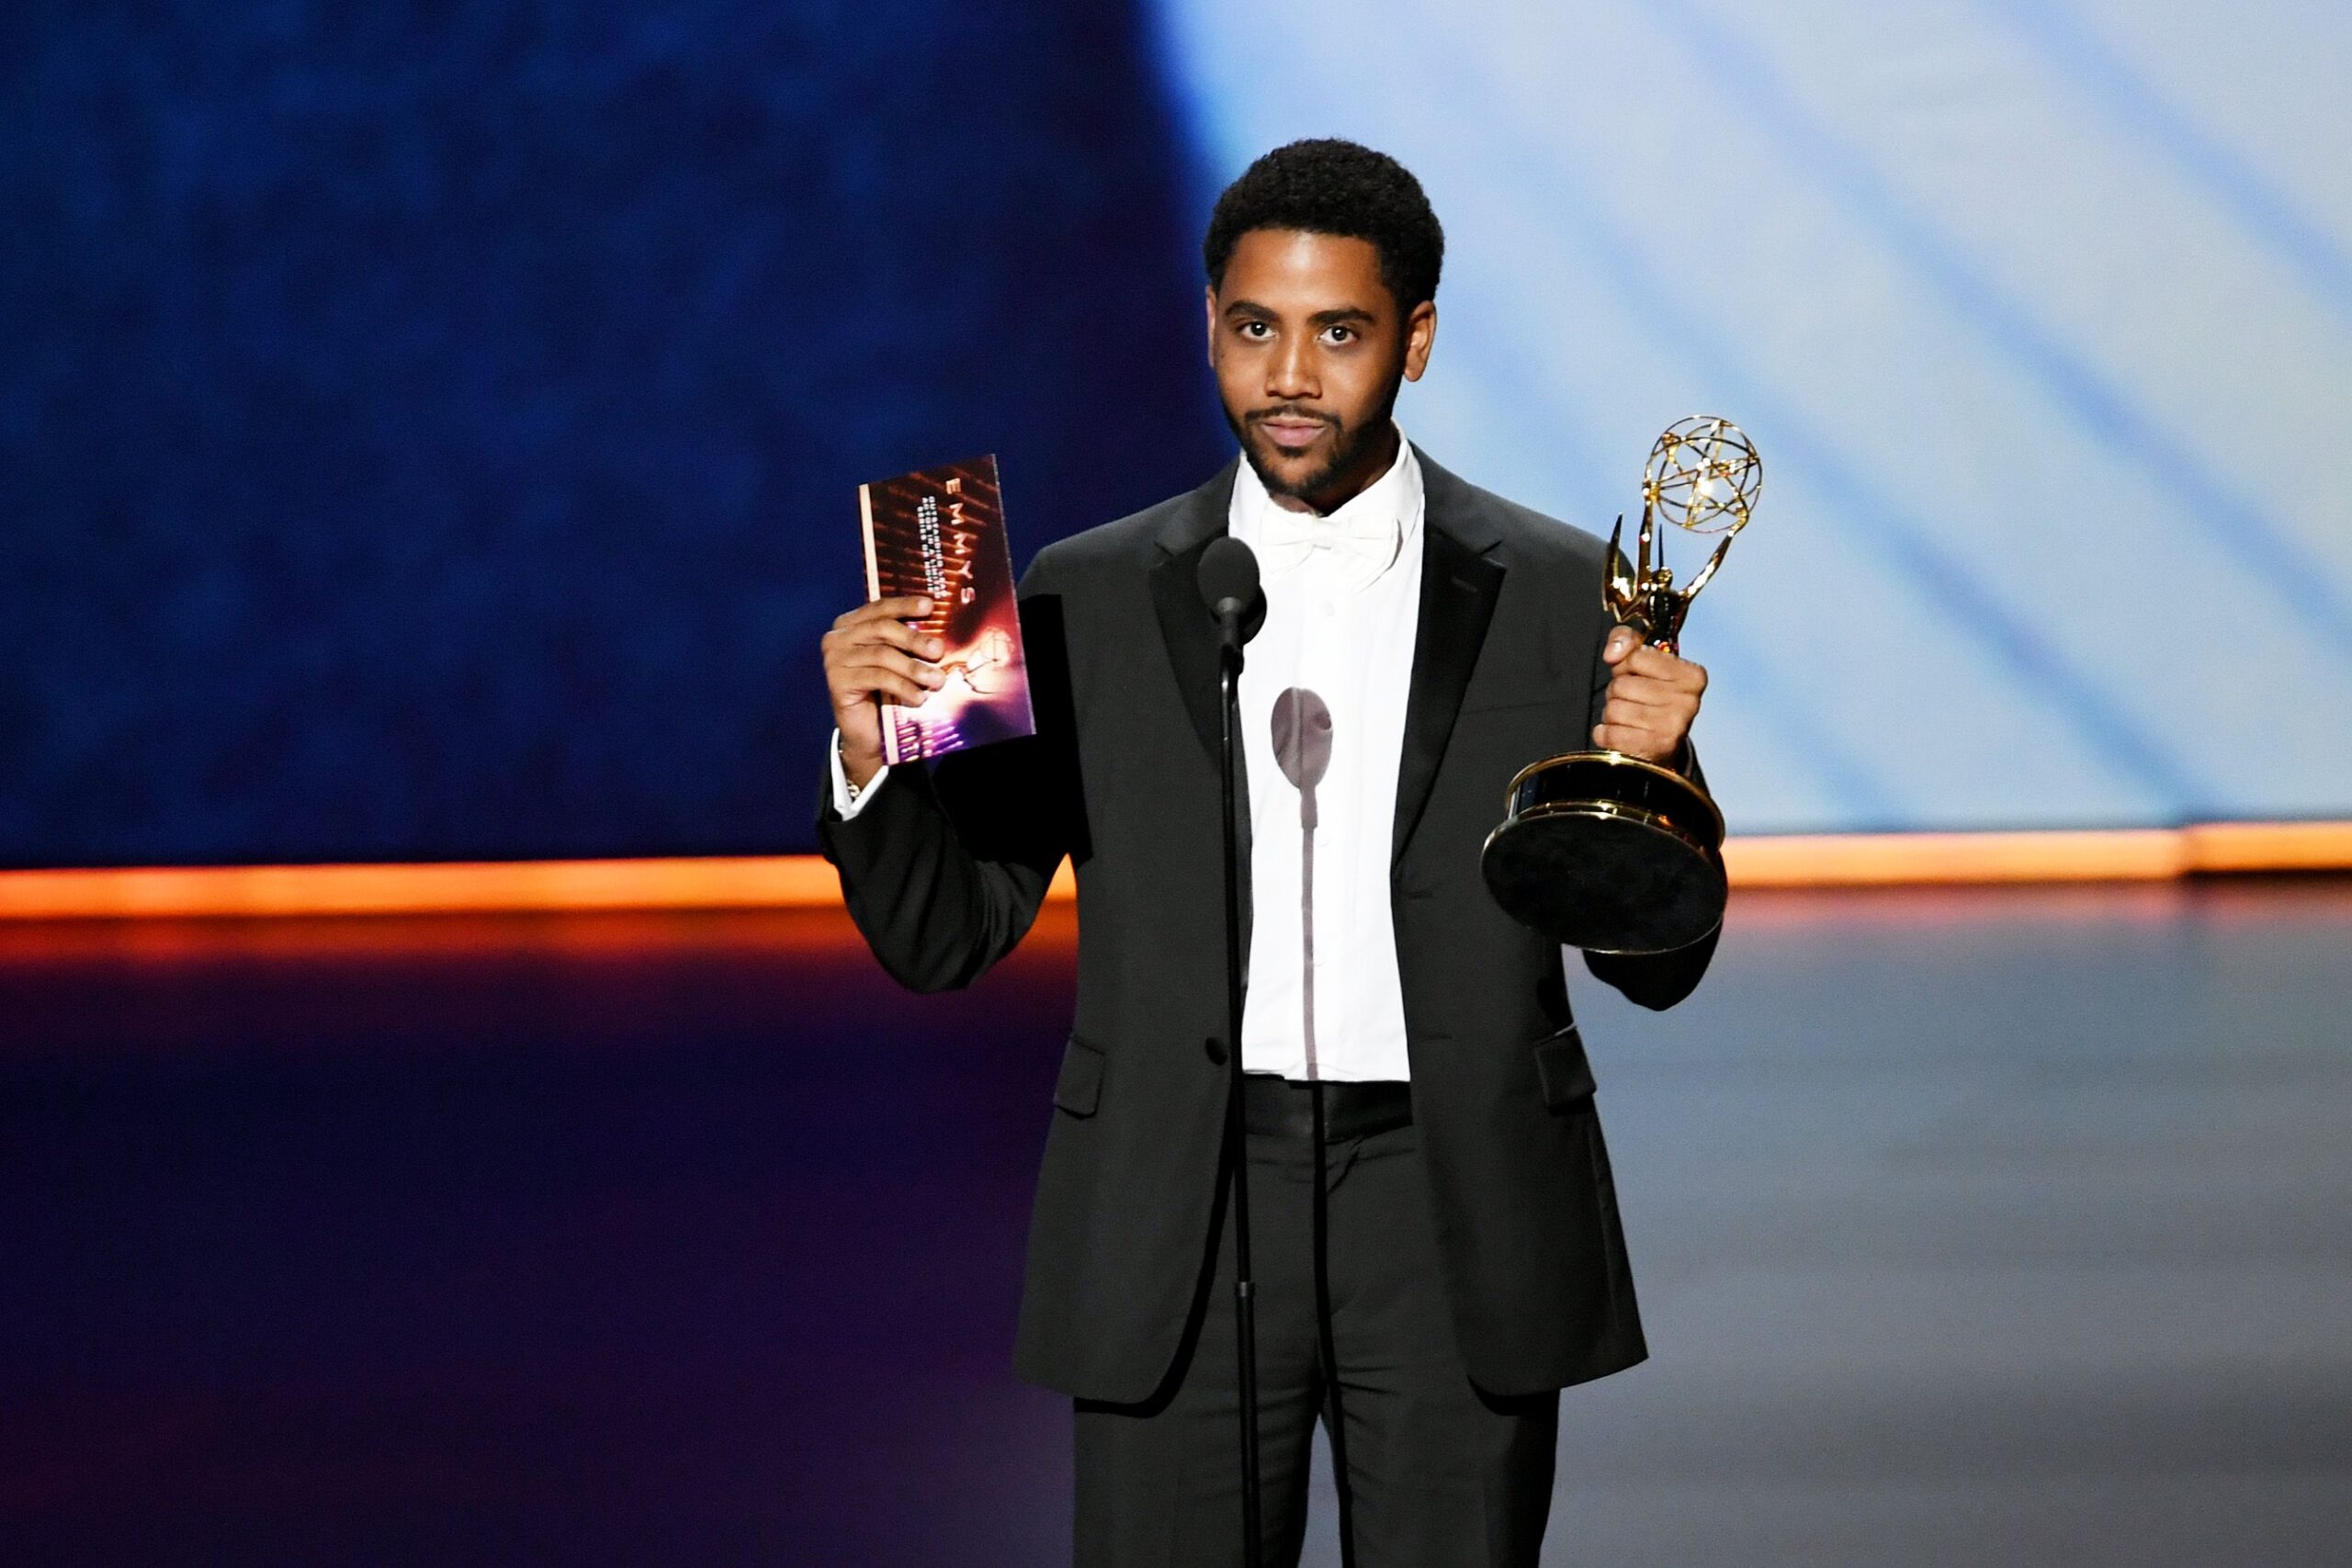 Only 1 Latinx Person Won an Emmy — That’s Just Not Enough